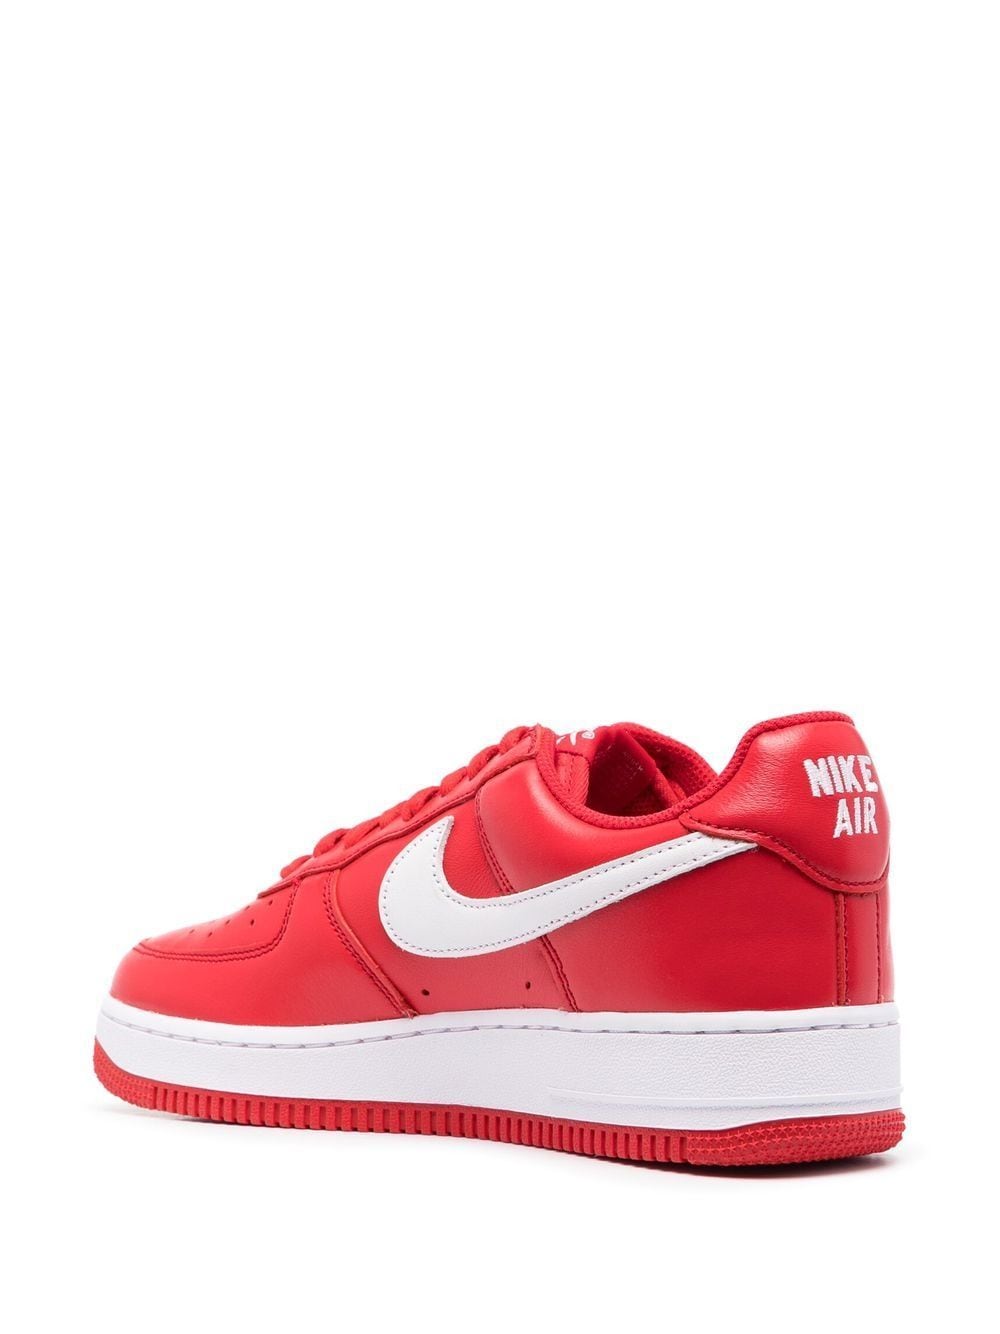 Nike Air Force 1 "Color Of The Month Red" sneakers